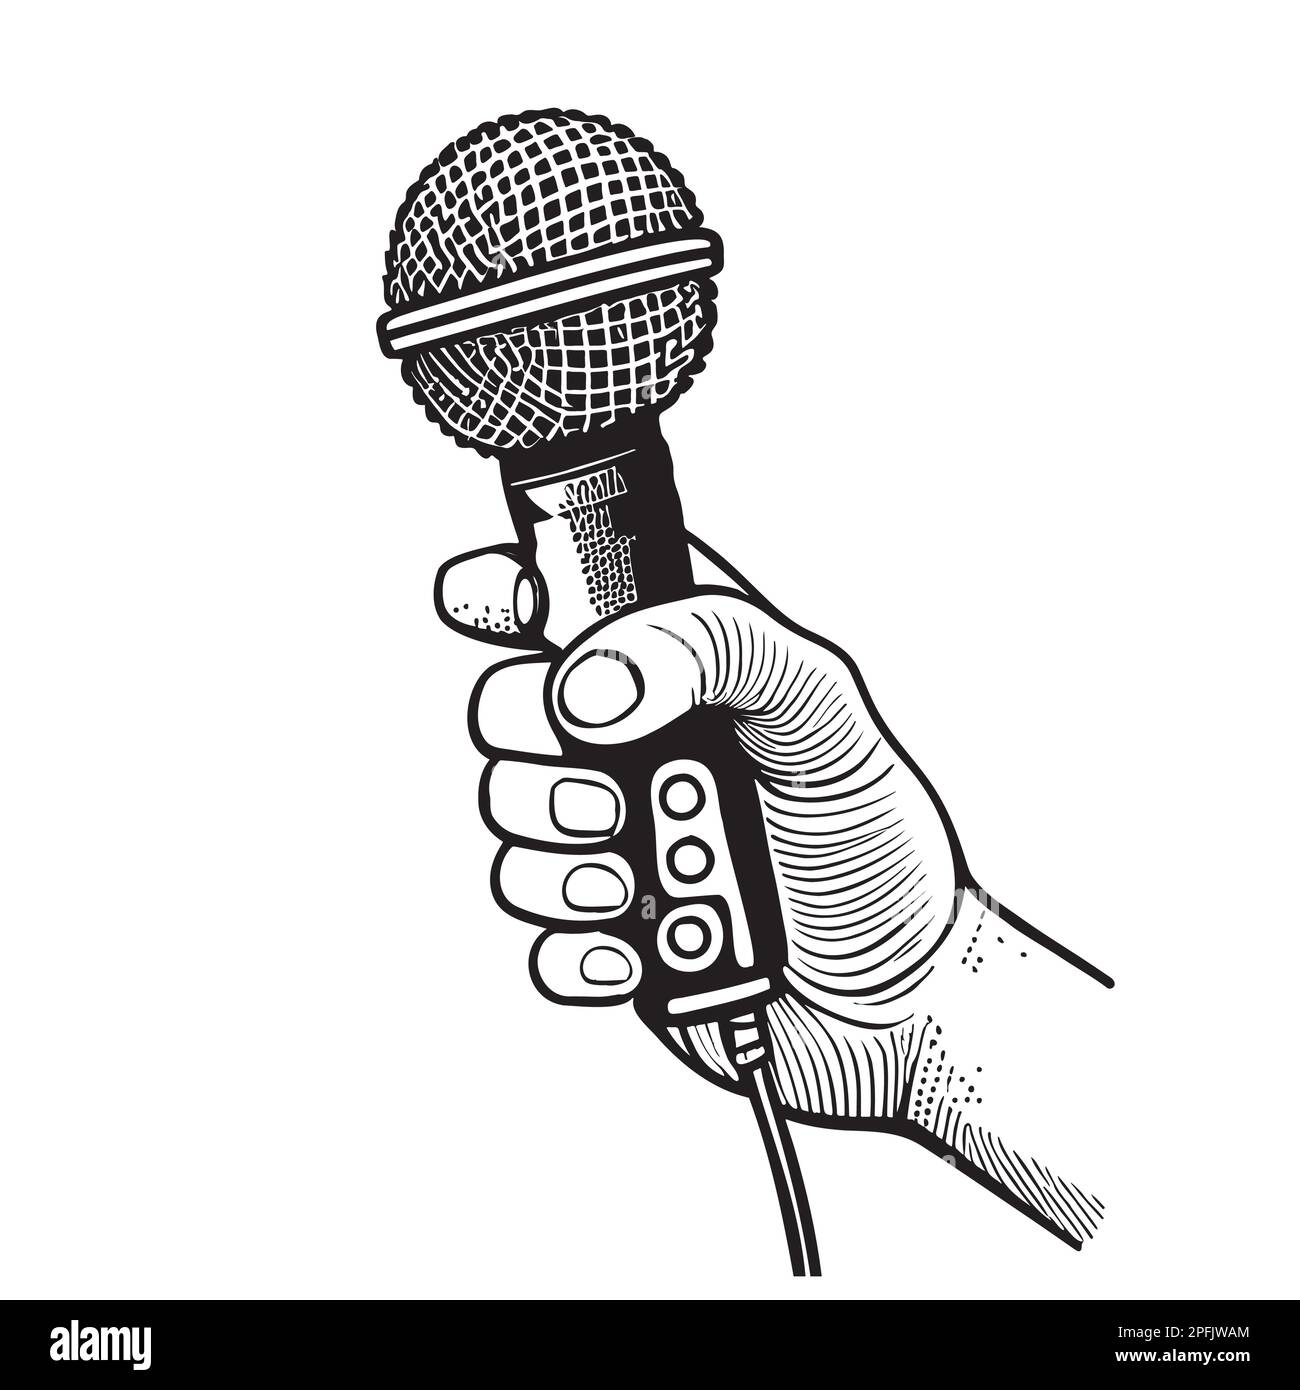 Hand holding microphone hand drawn sketch in doodle style Vector illustration Stock Vector